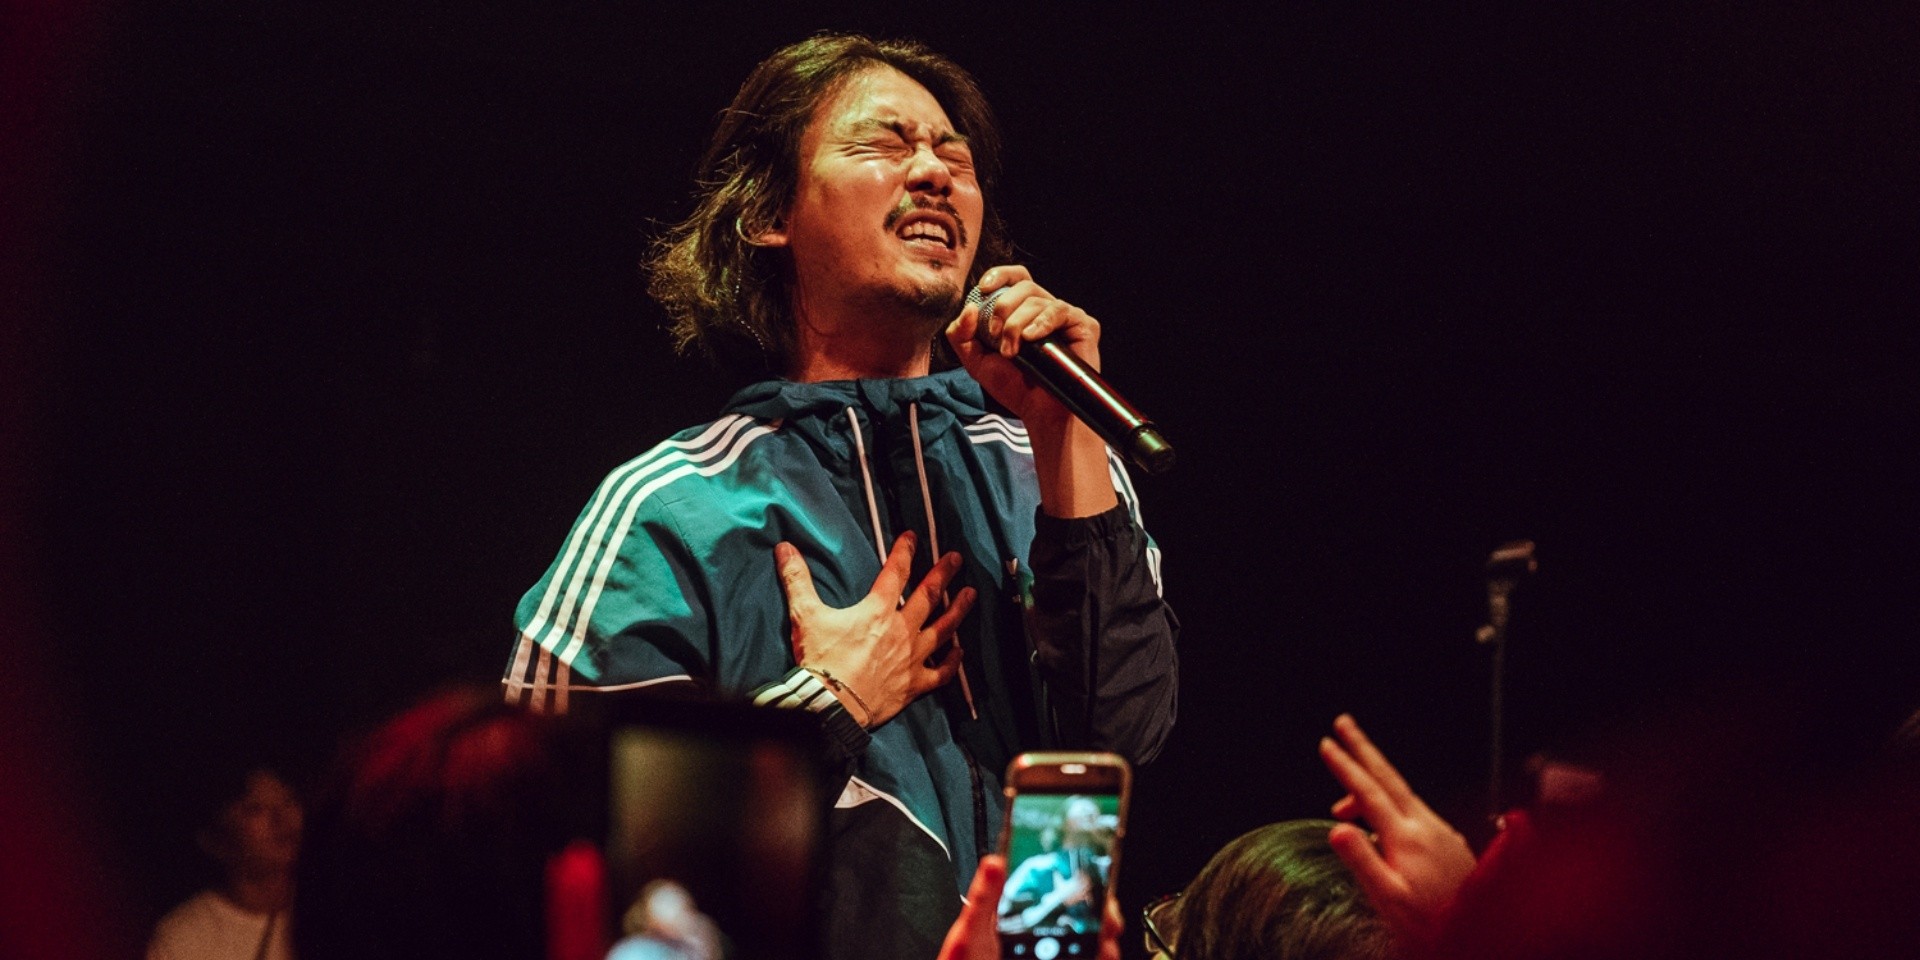 Korean indie band ADOY charms fans at debut Singapore show – gig report 